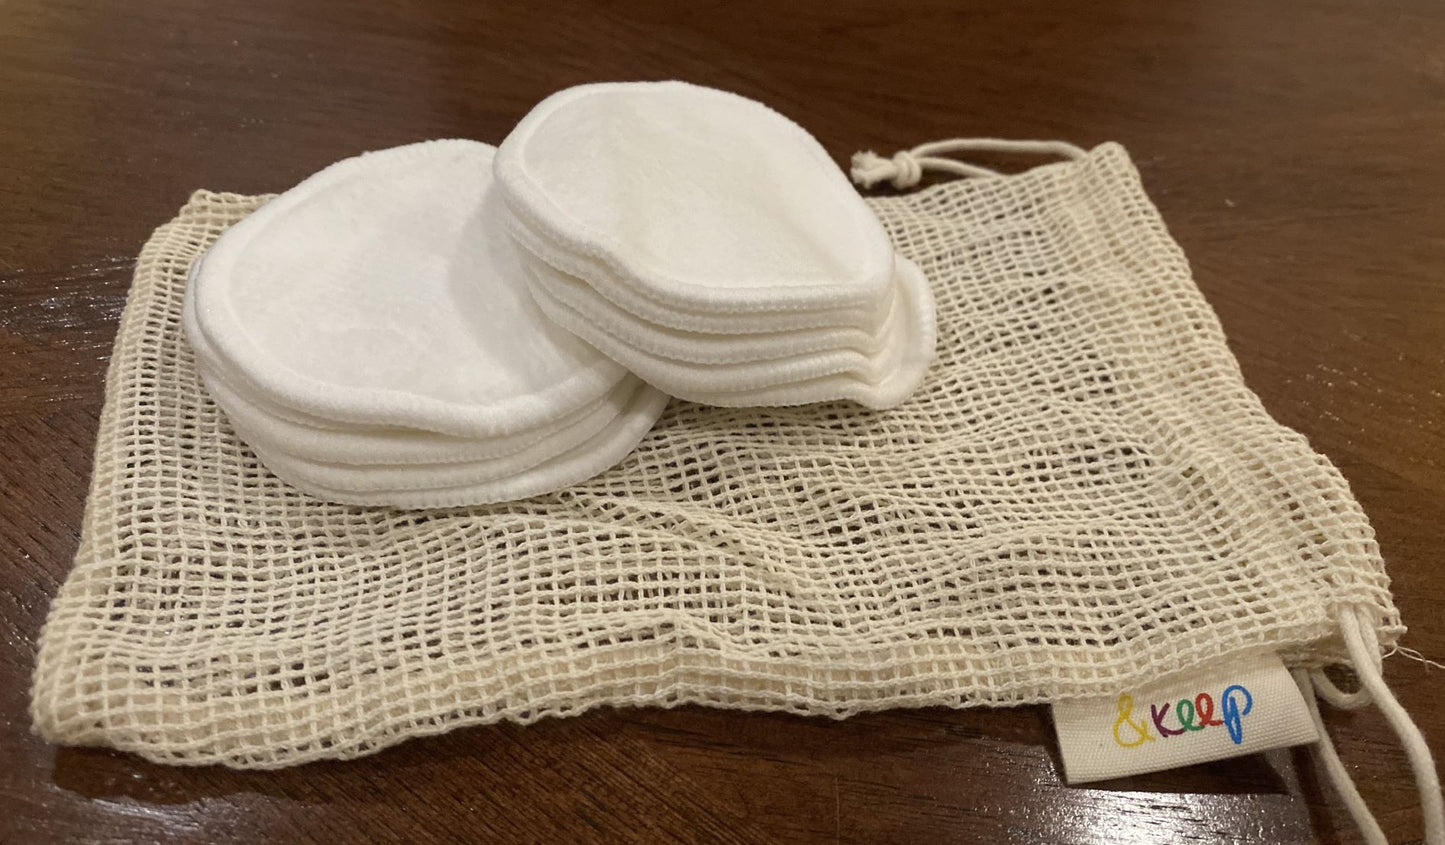 10 Reusable Soft Bamboo & Cotton Make-Up Pads in Cotton with Cotton Mesh Wash Bag, Eco-Friendly Product, Plastic-Free